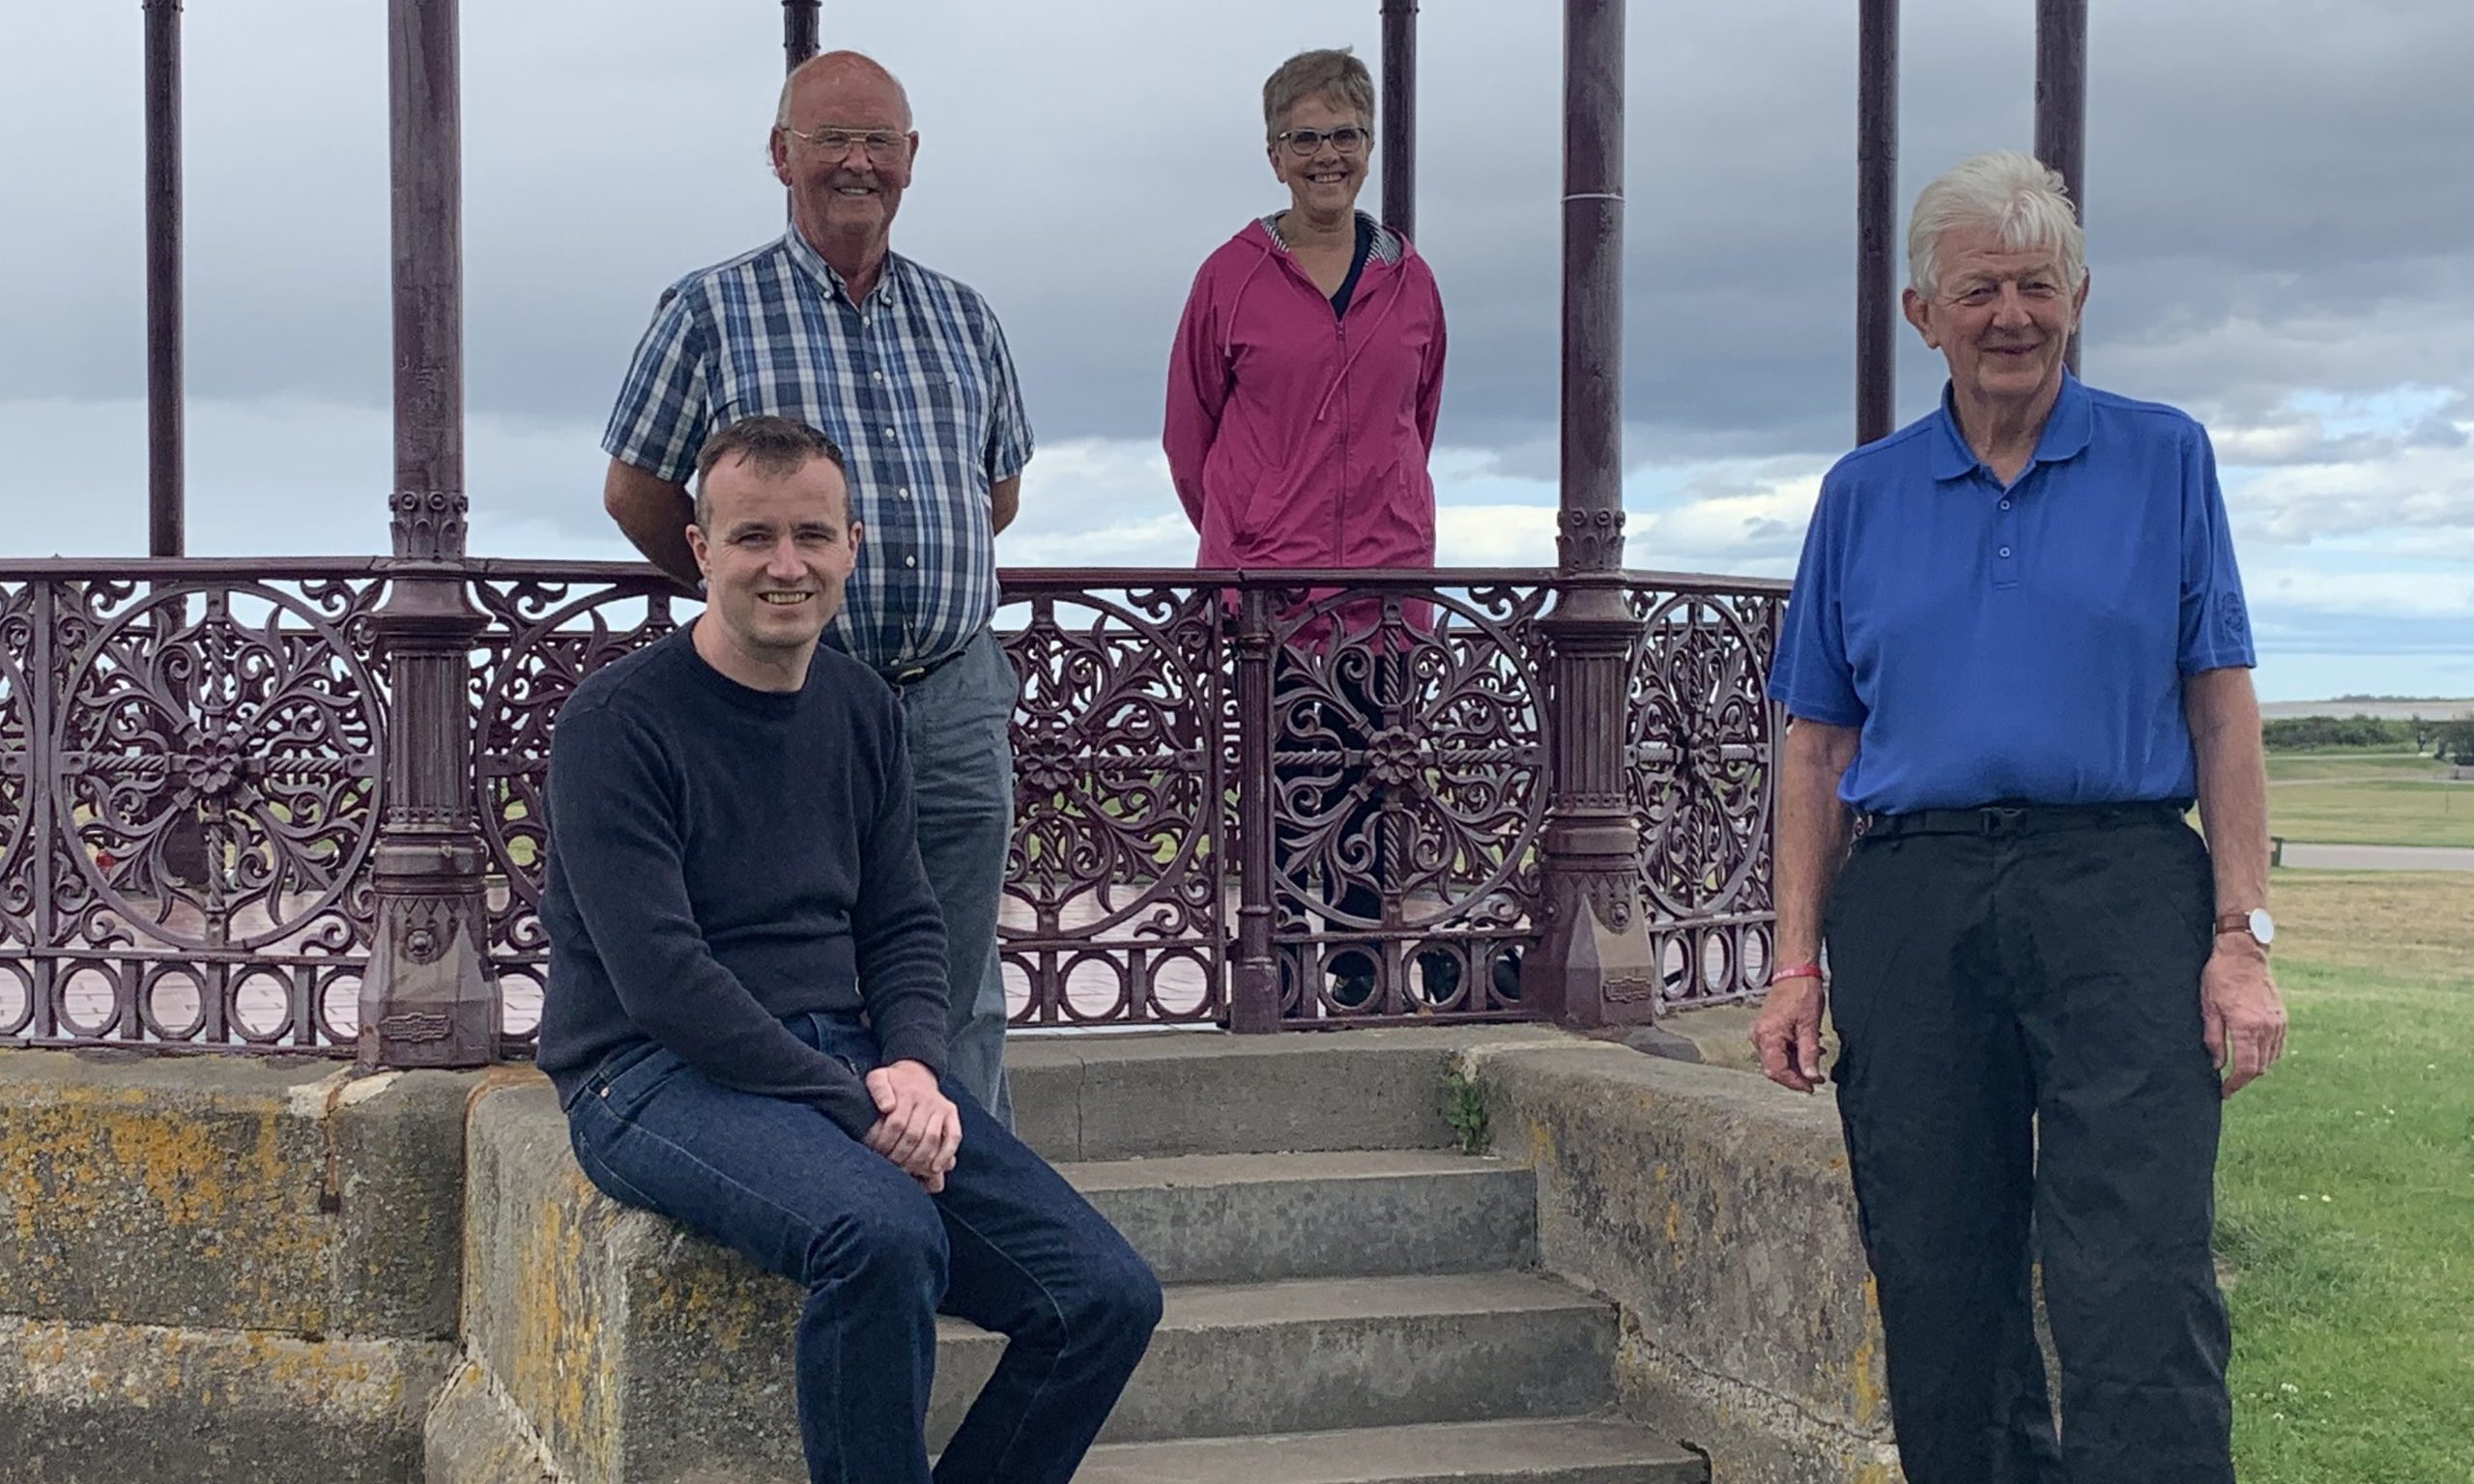 Nairn Bid chairman Michael Boylan, Tommy Hogg, chairman of Nairn River Community Council, Sheena Baker chair of Nairn West and Suburban Community Council and Alastair Noble Chairman of Nice